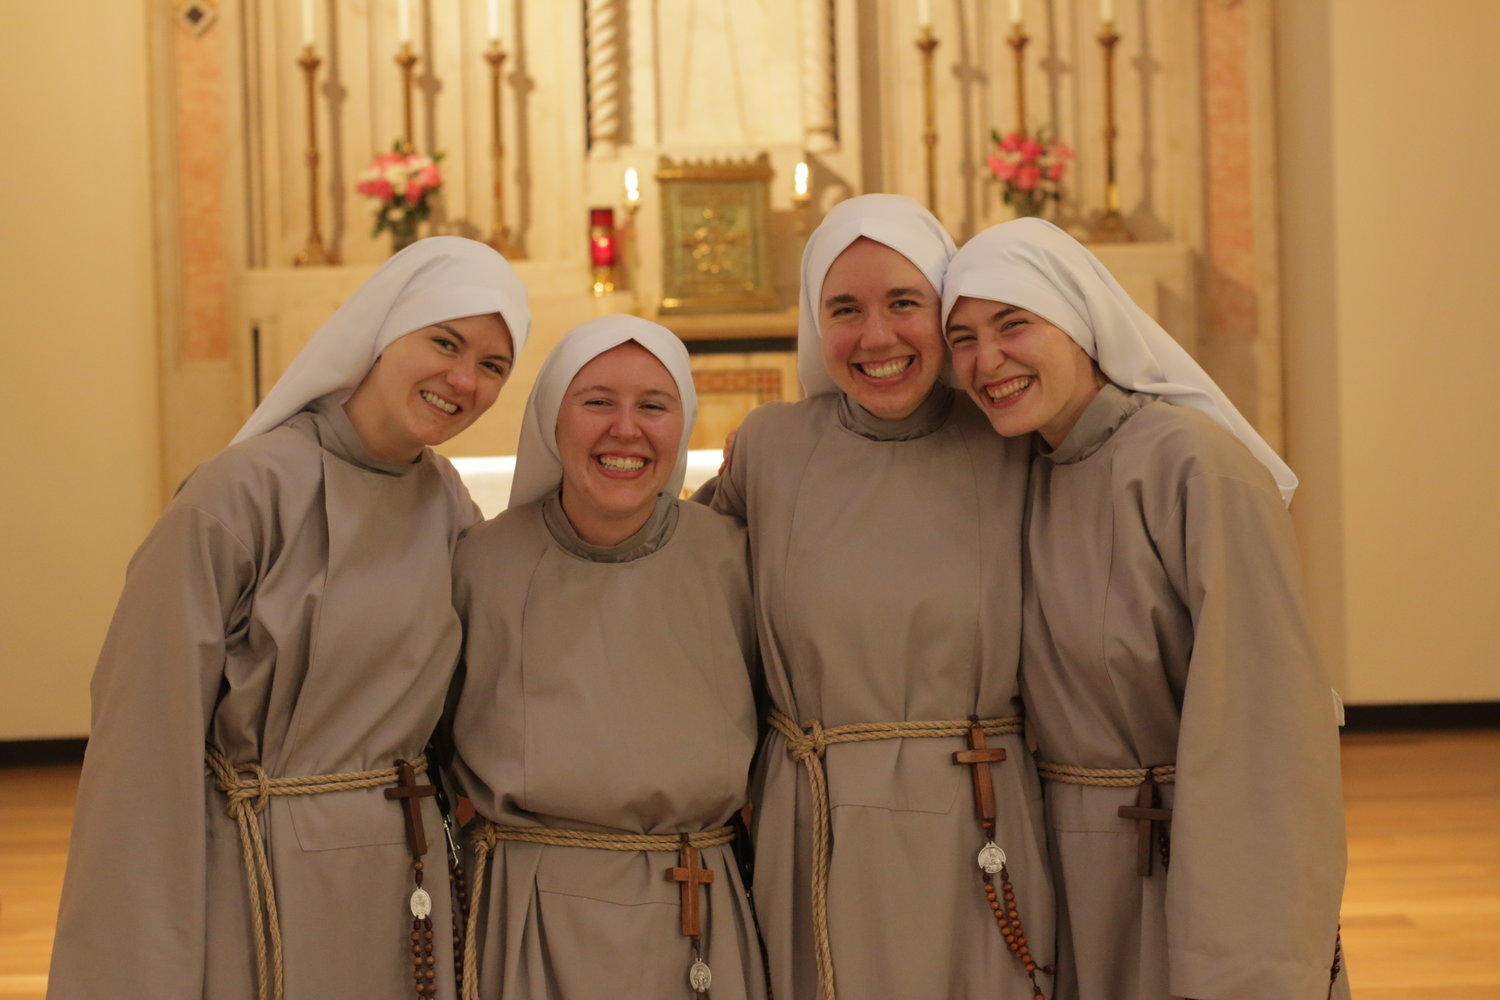 NEW SISTERS—The newly invested Franciscan Sisters of the Renewal are, from left, Sister Mary Joseph,
C.F.R., (Natalie Cook); Sister Solanus, C.F.R. (Mary Margaret Payne); Sister Clara Marie, C.F.R. (Emma
Dickinson); and Sister Fidelis, C.F.R. (Larissa Kriss). Their investiture ceremony, at which Cardinal Dolan
presided, took place Aug. 2.